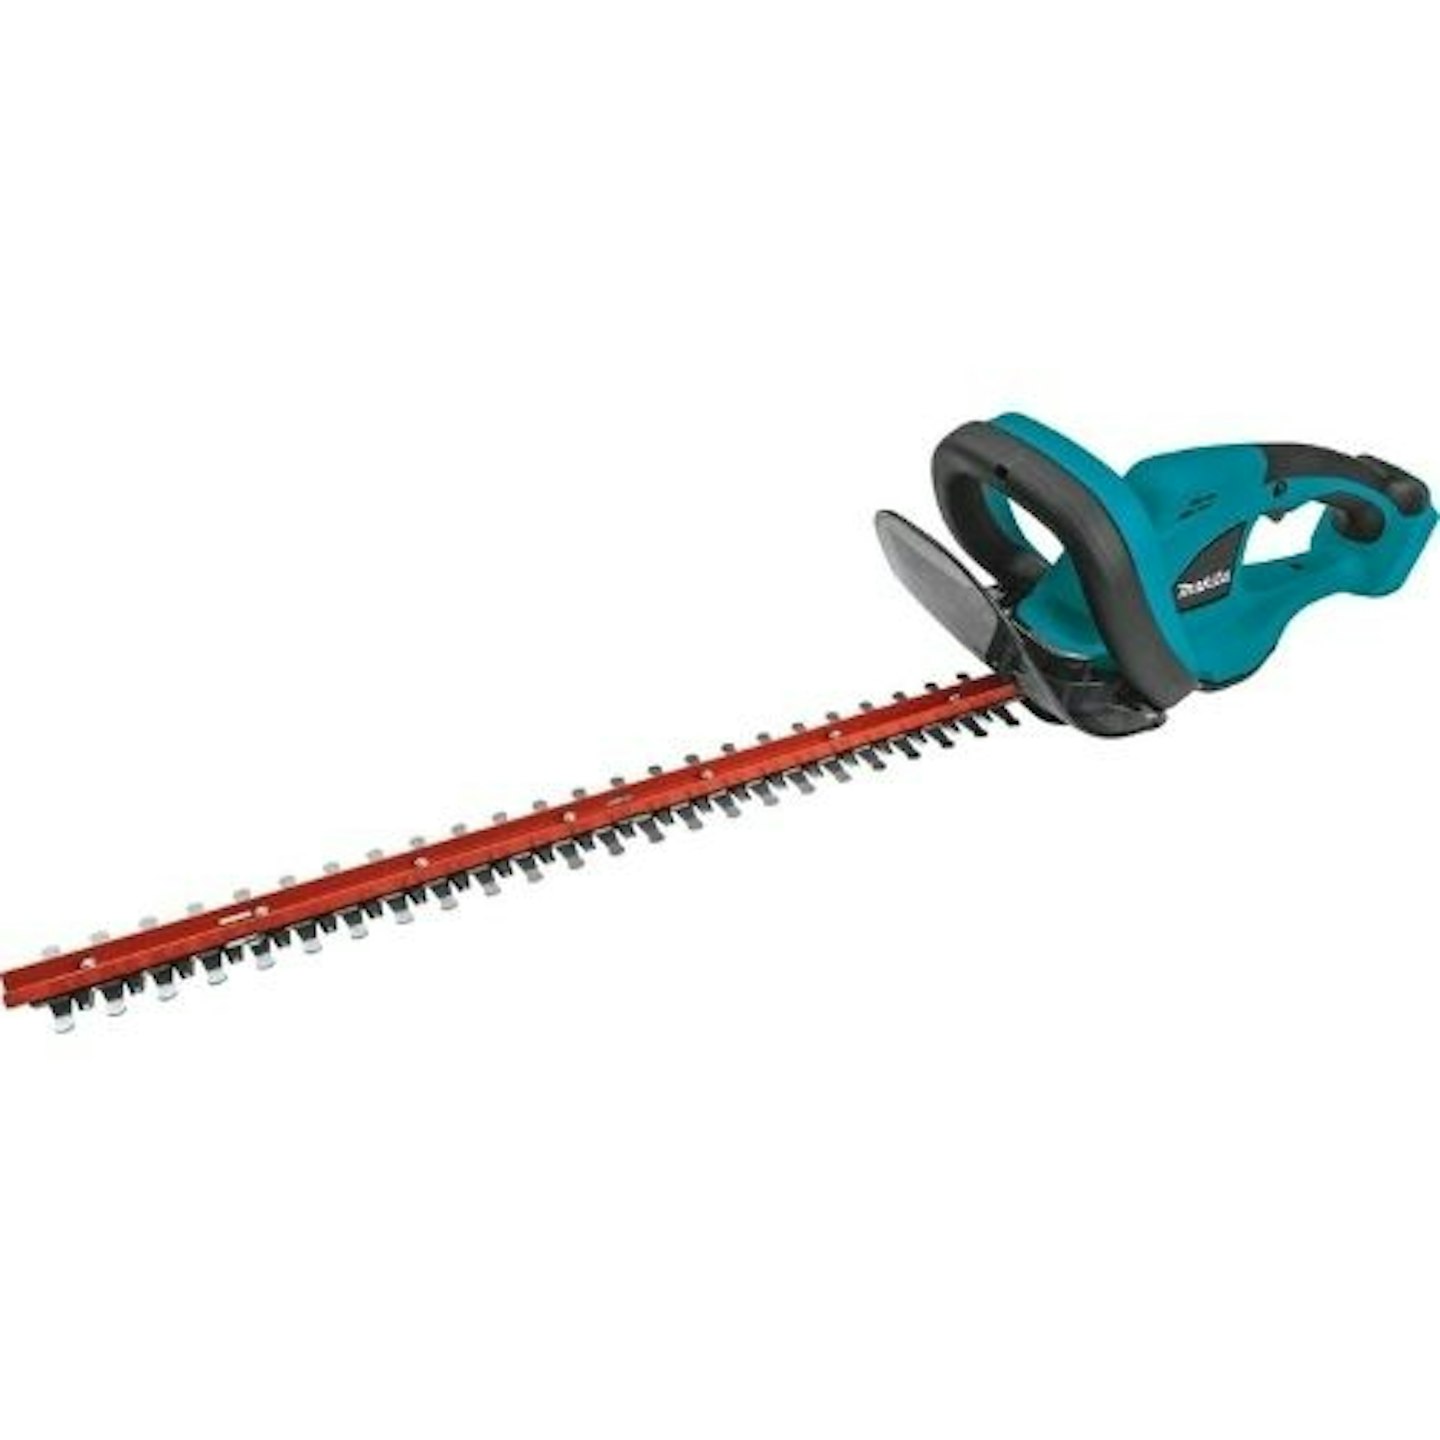 Makita DUH523Z Cordless LXT Lithium-Ion Hedge Trimmer (Body Only)